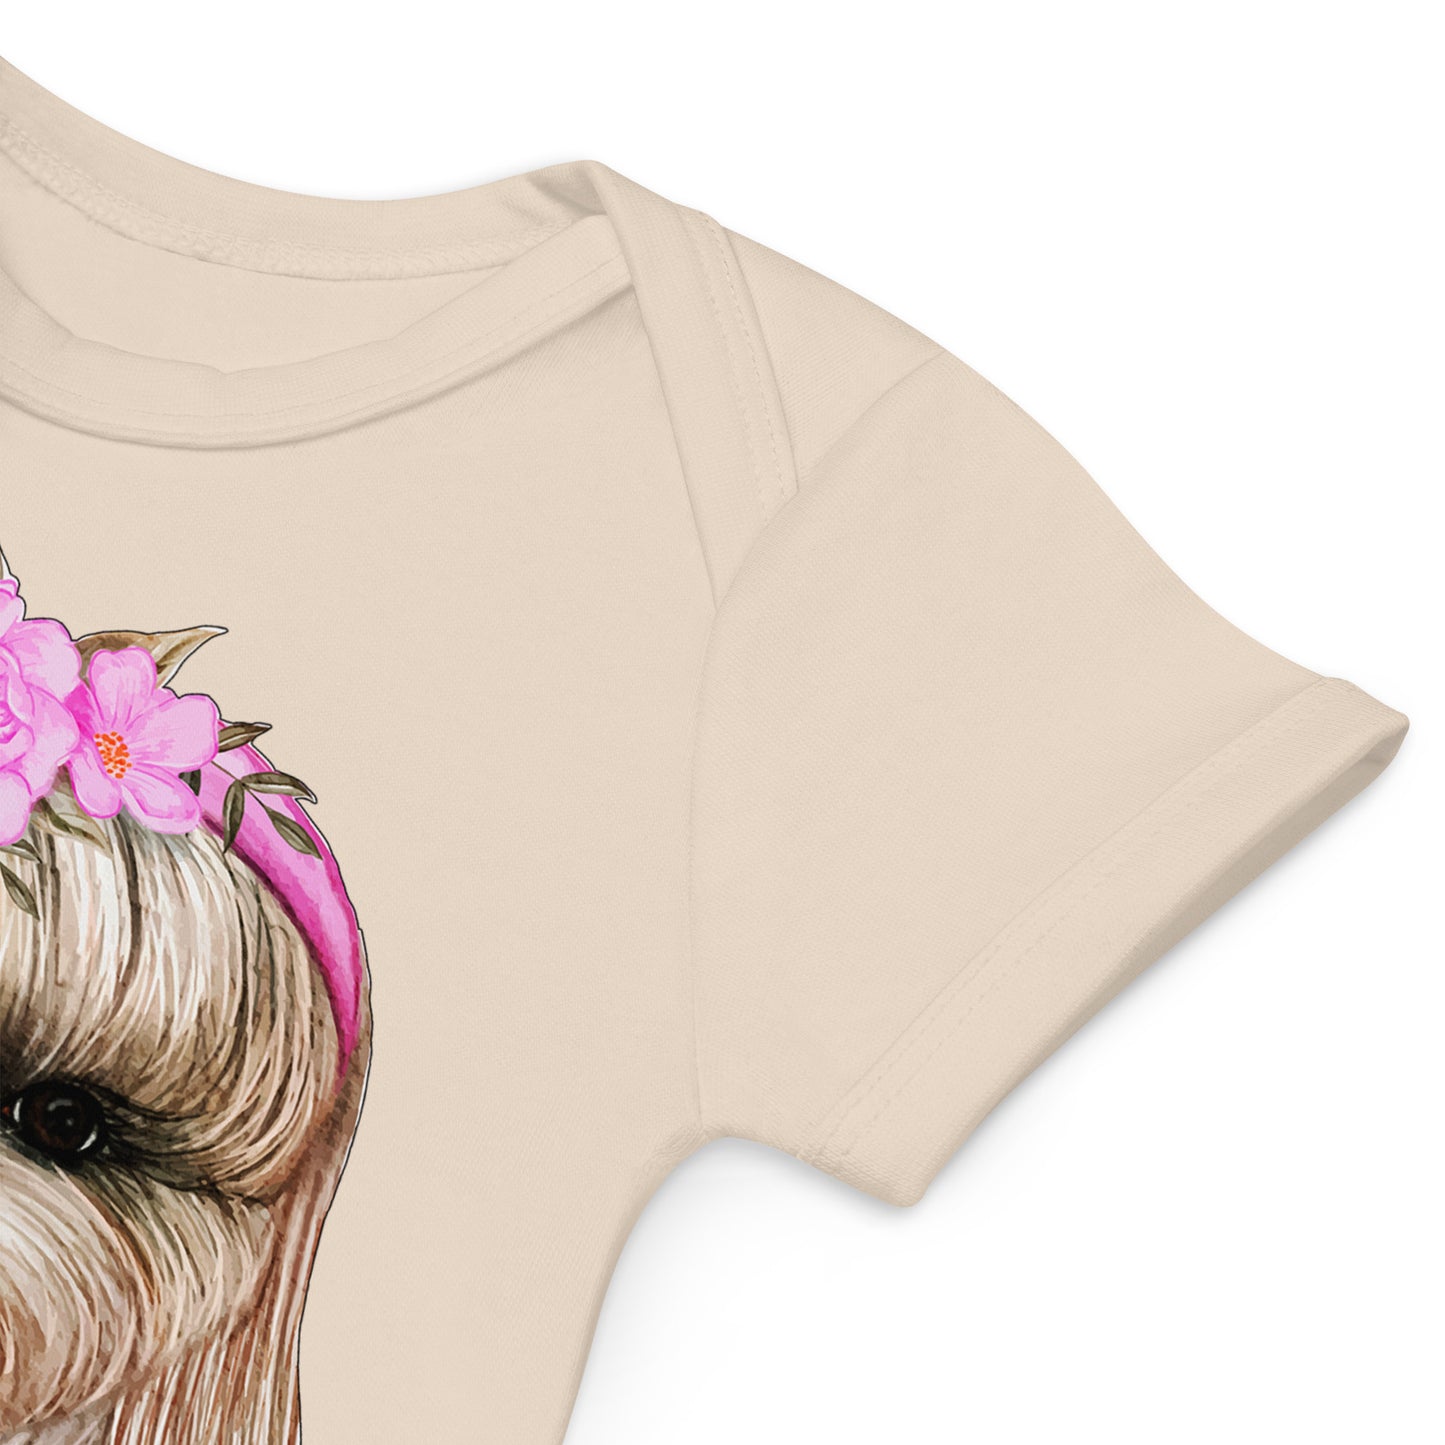 Adorable Dog with Flower Hair Crowns Bodysuit, No. 0562